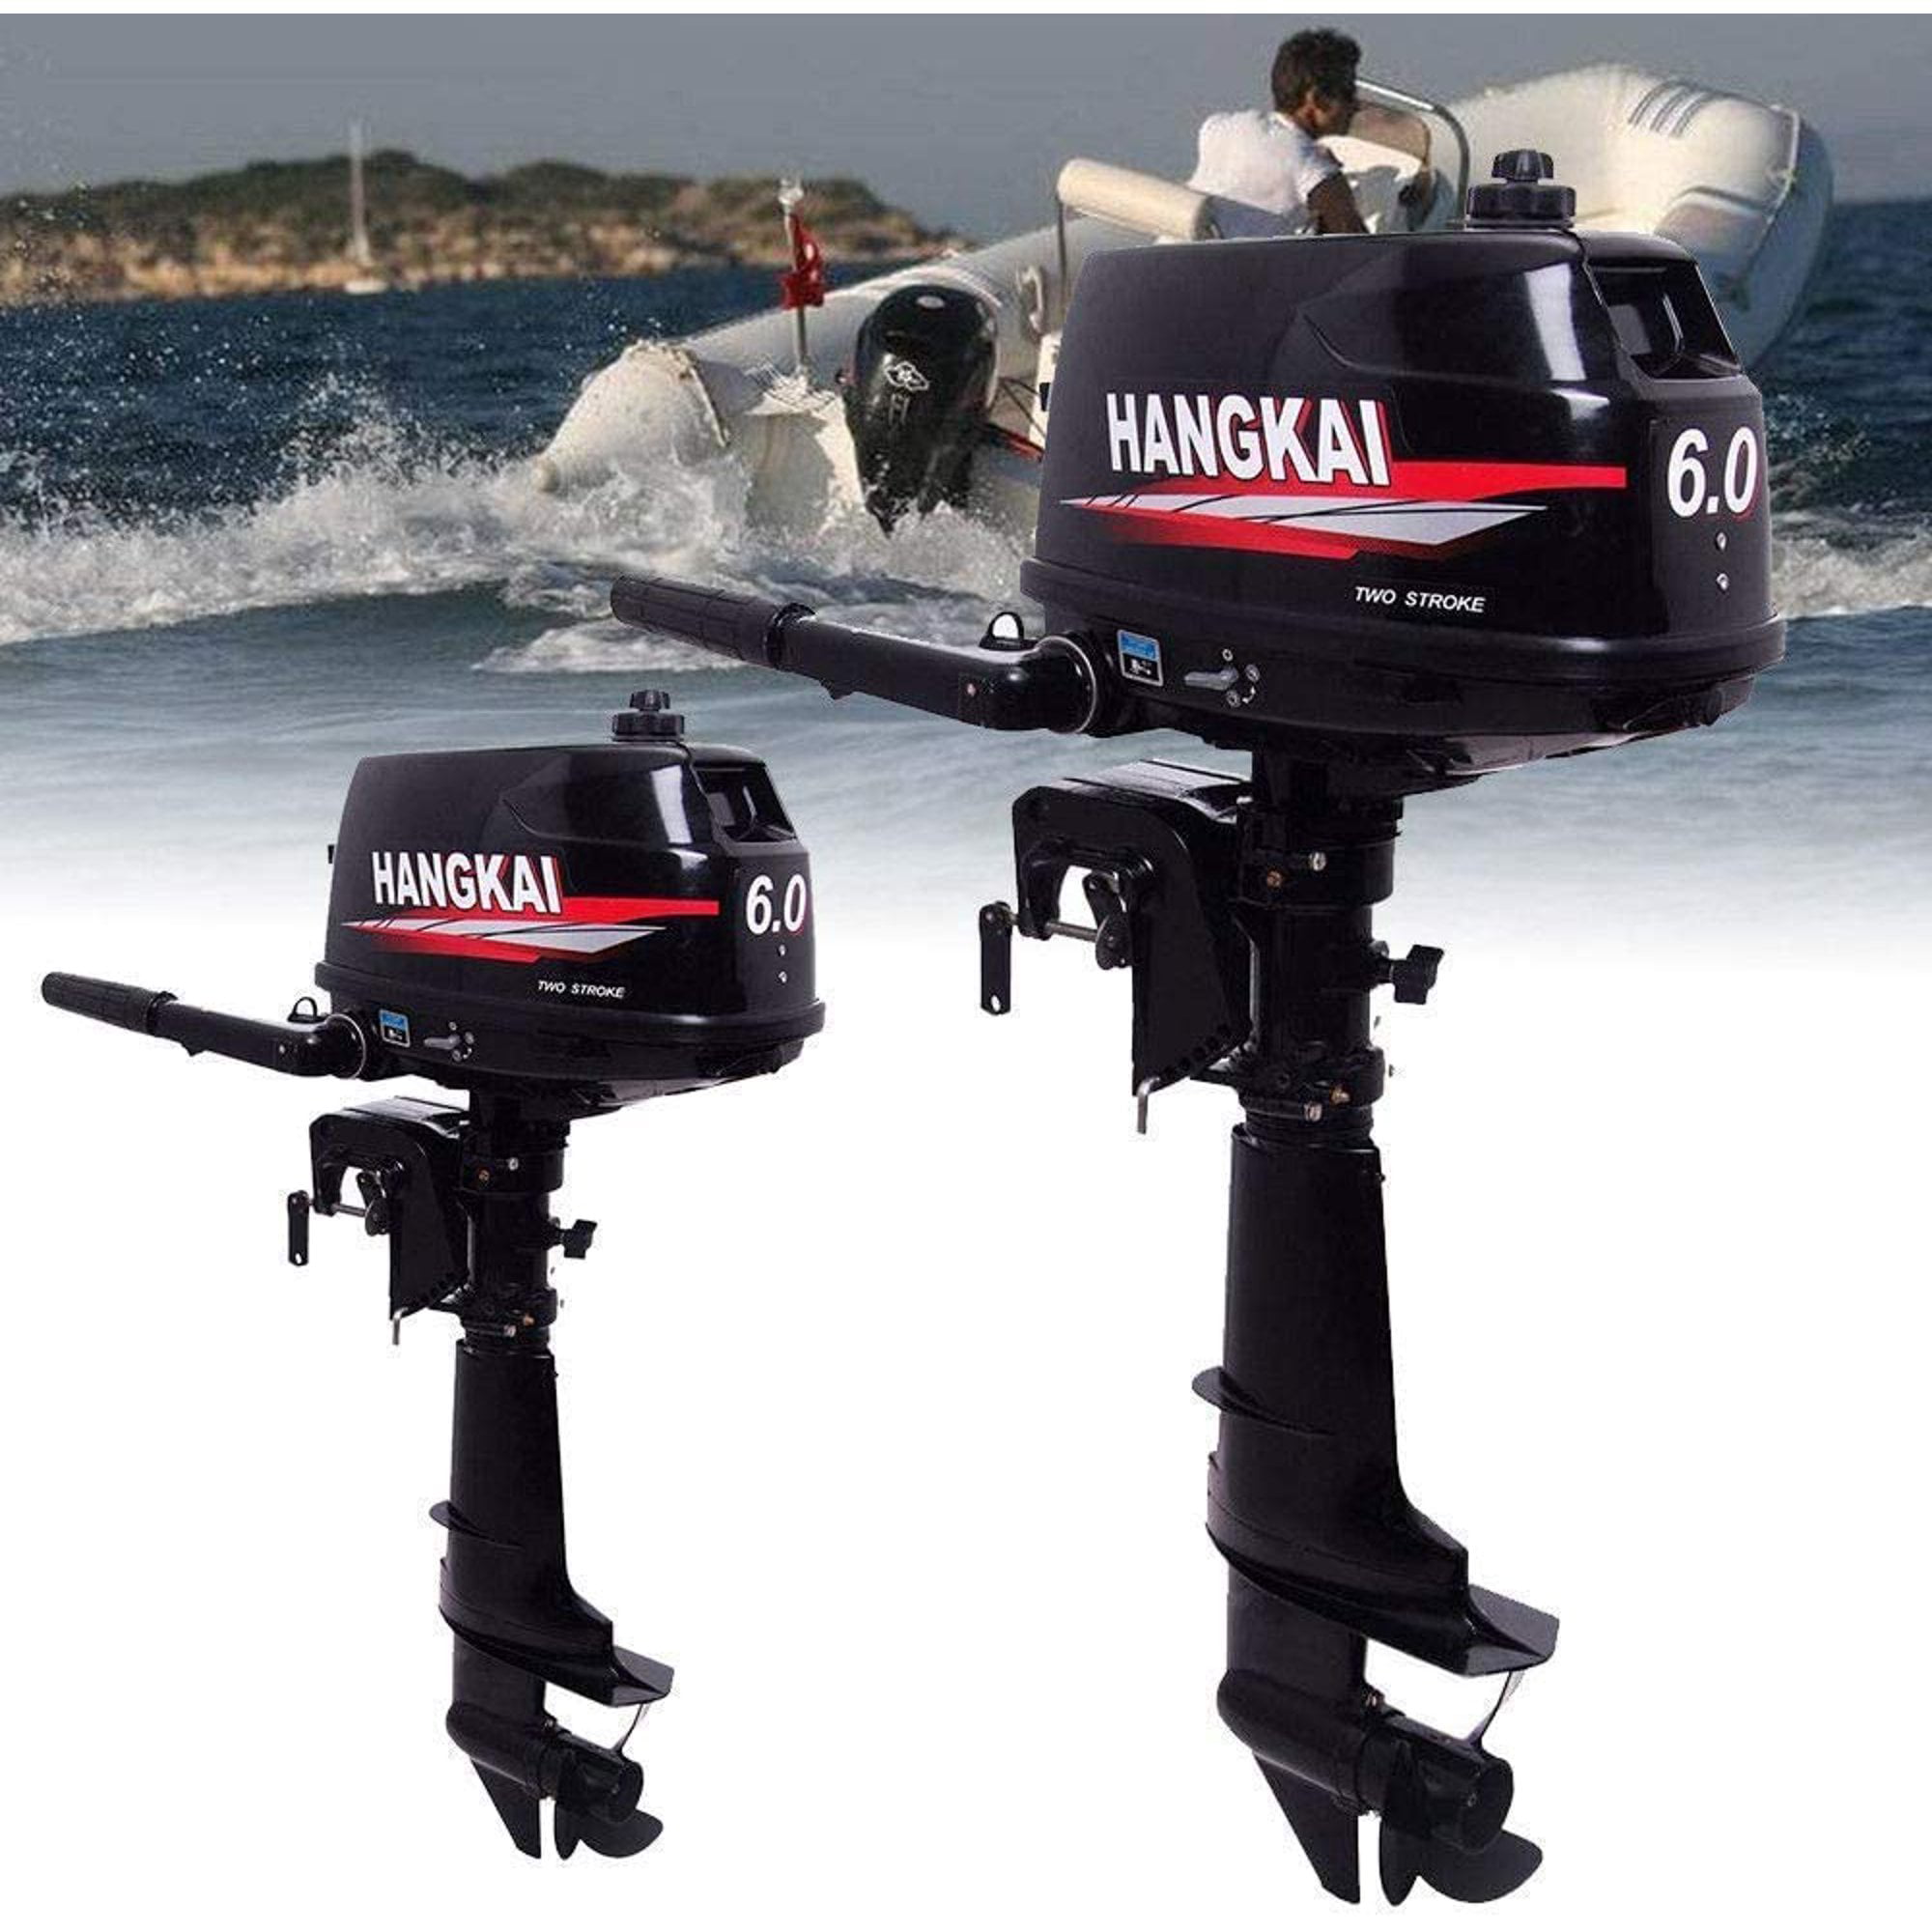 3.5 HP 2-Stroke Outboard Motor Fishing Boat Engine Water-Cooling CDI System New! 